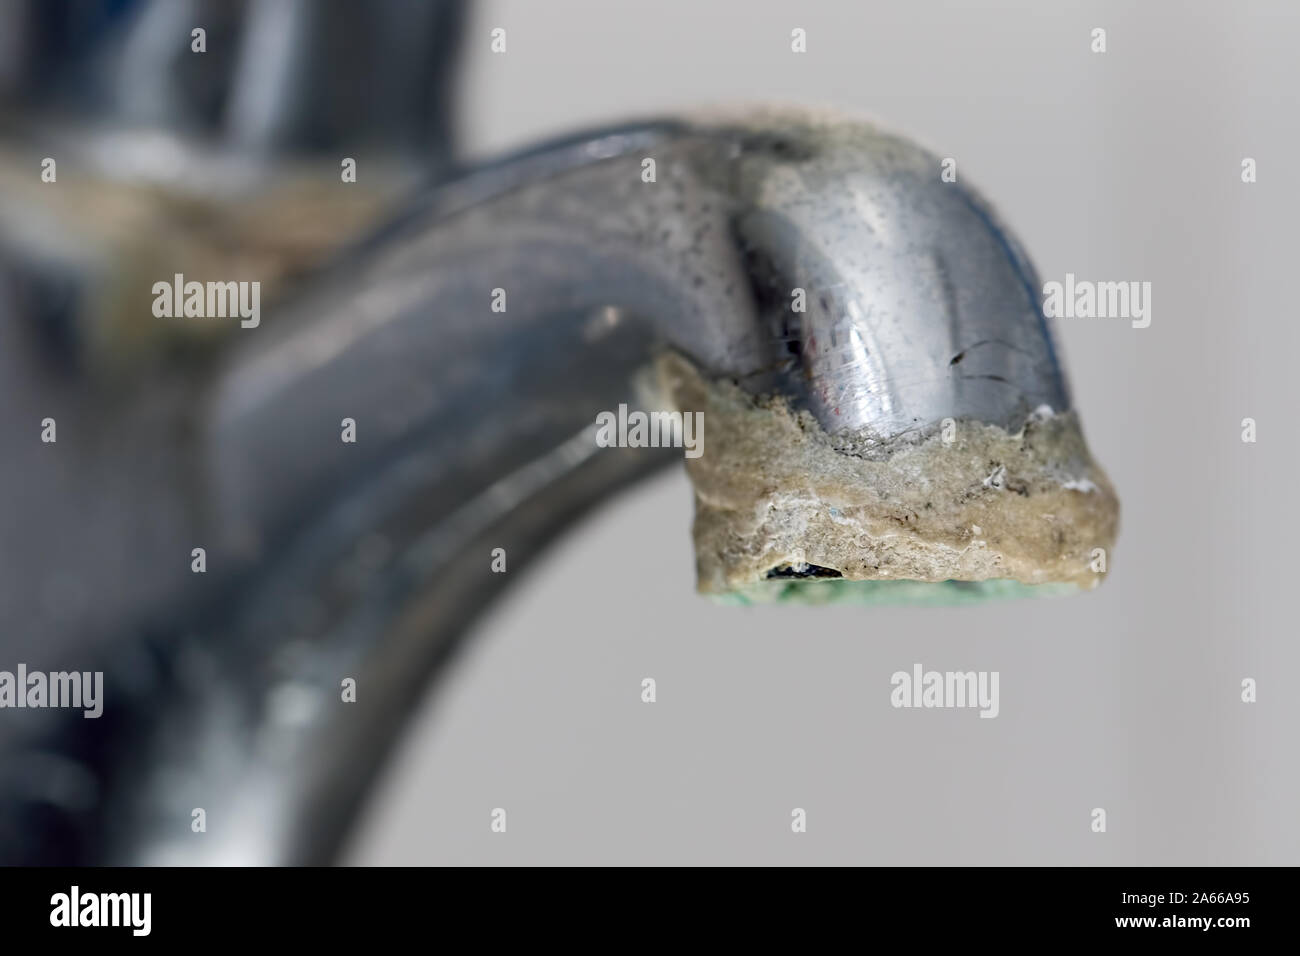 Close-up of limescale build-up. Selective focus on hard water deposit on old tap spout. Chrome kitchen or bathroom faucet with crusty calcium carbonat Stock Photo